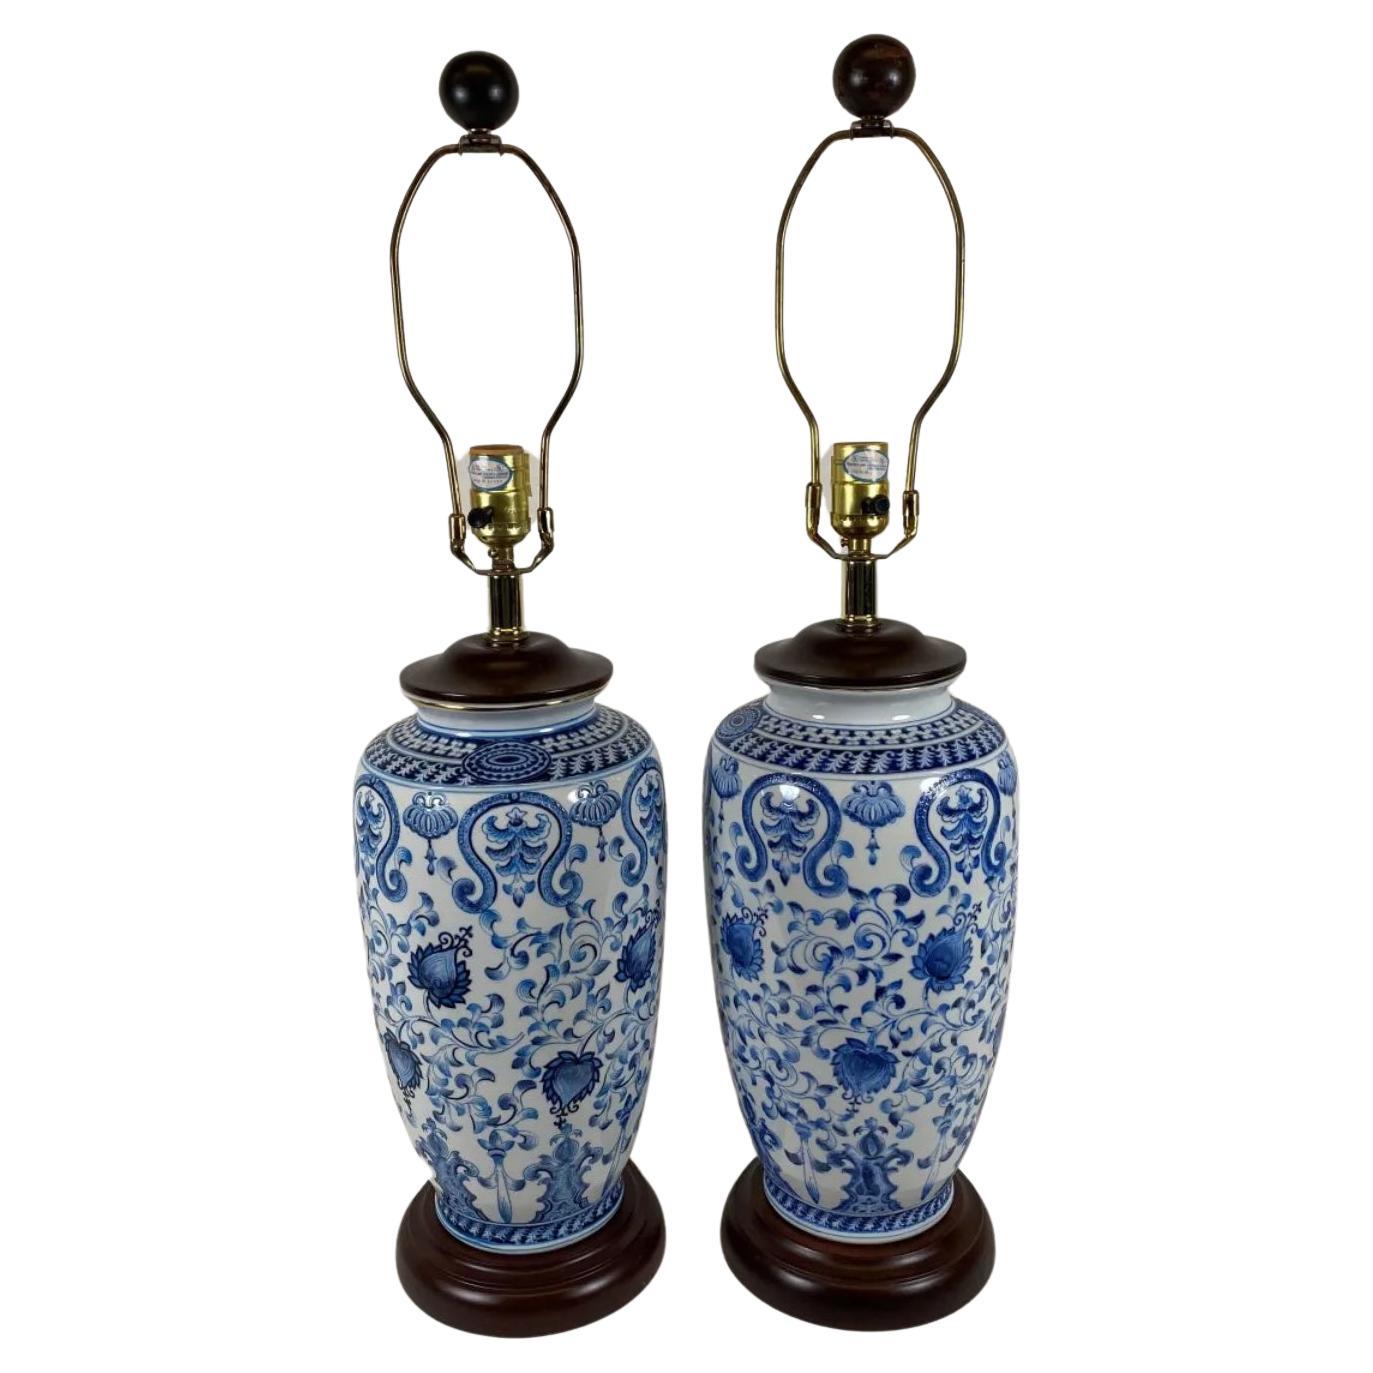 Pair of Chinese Blue & White Porcelain Lamps with Wooden Tops